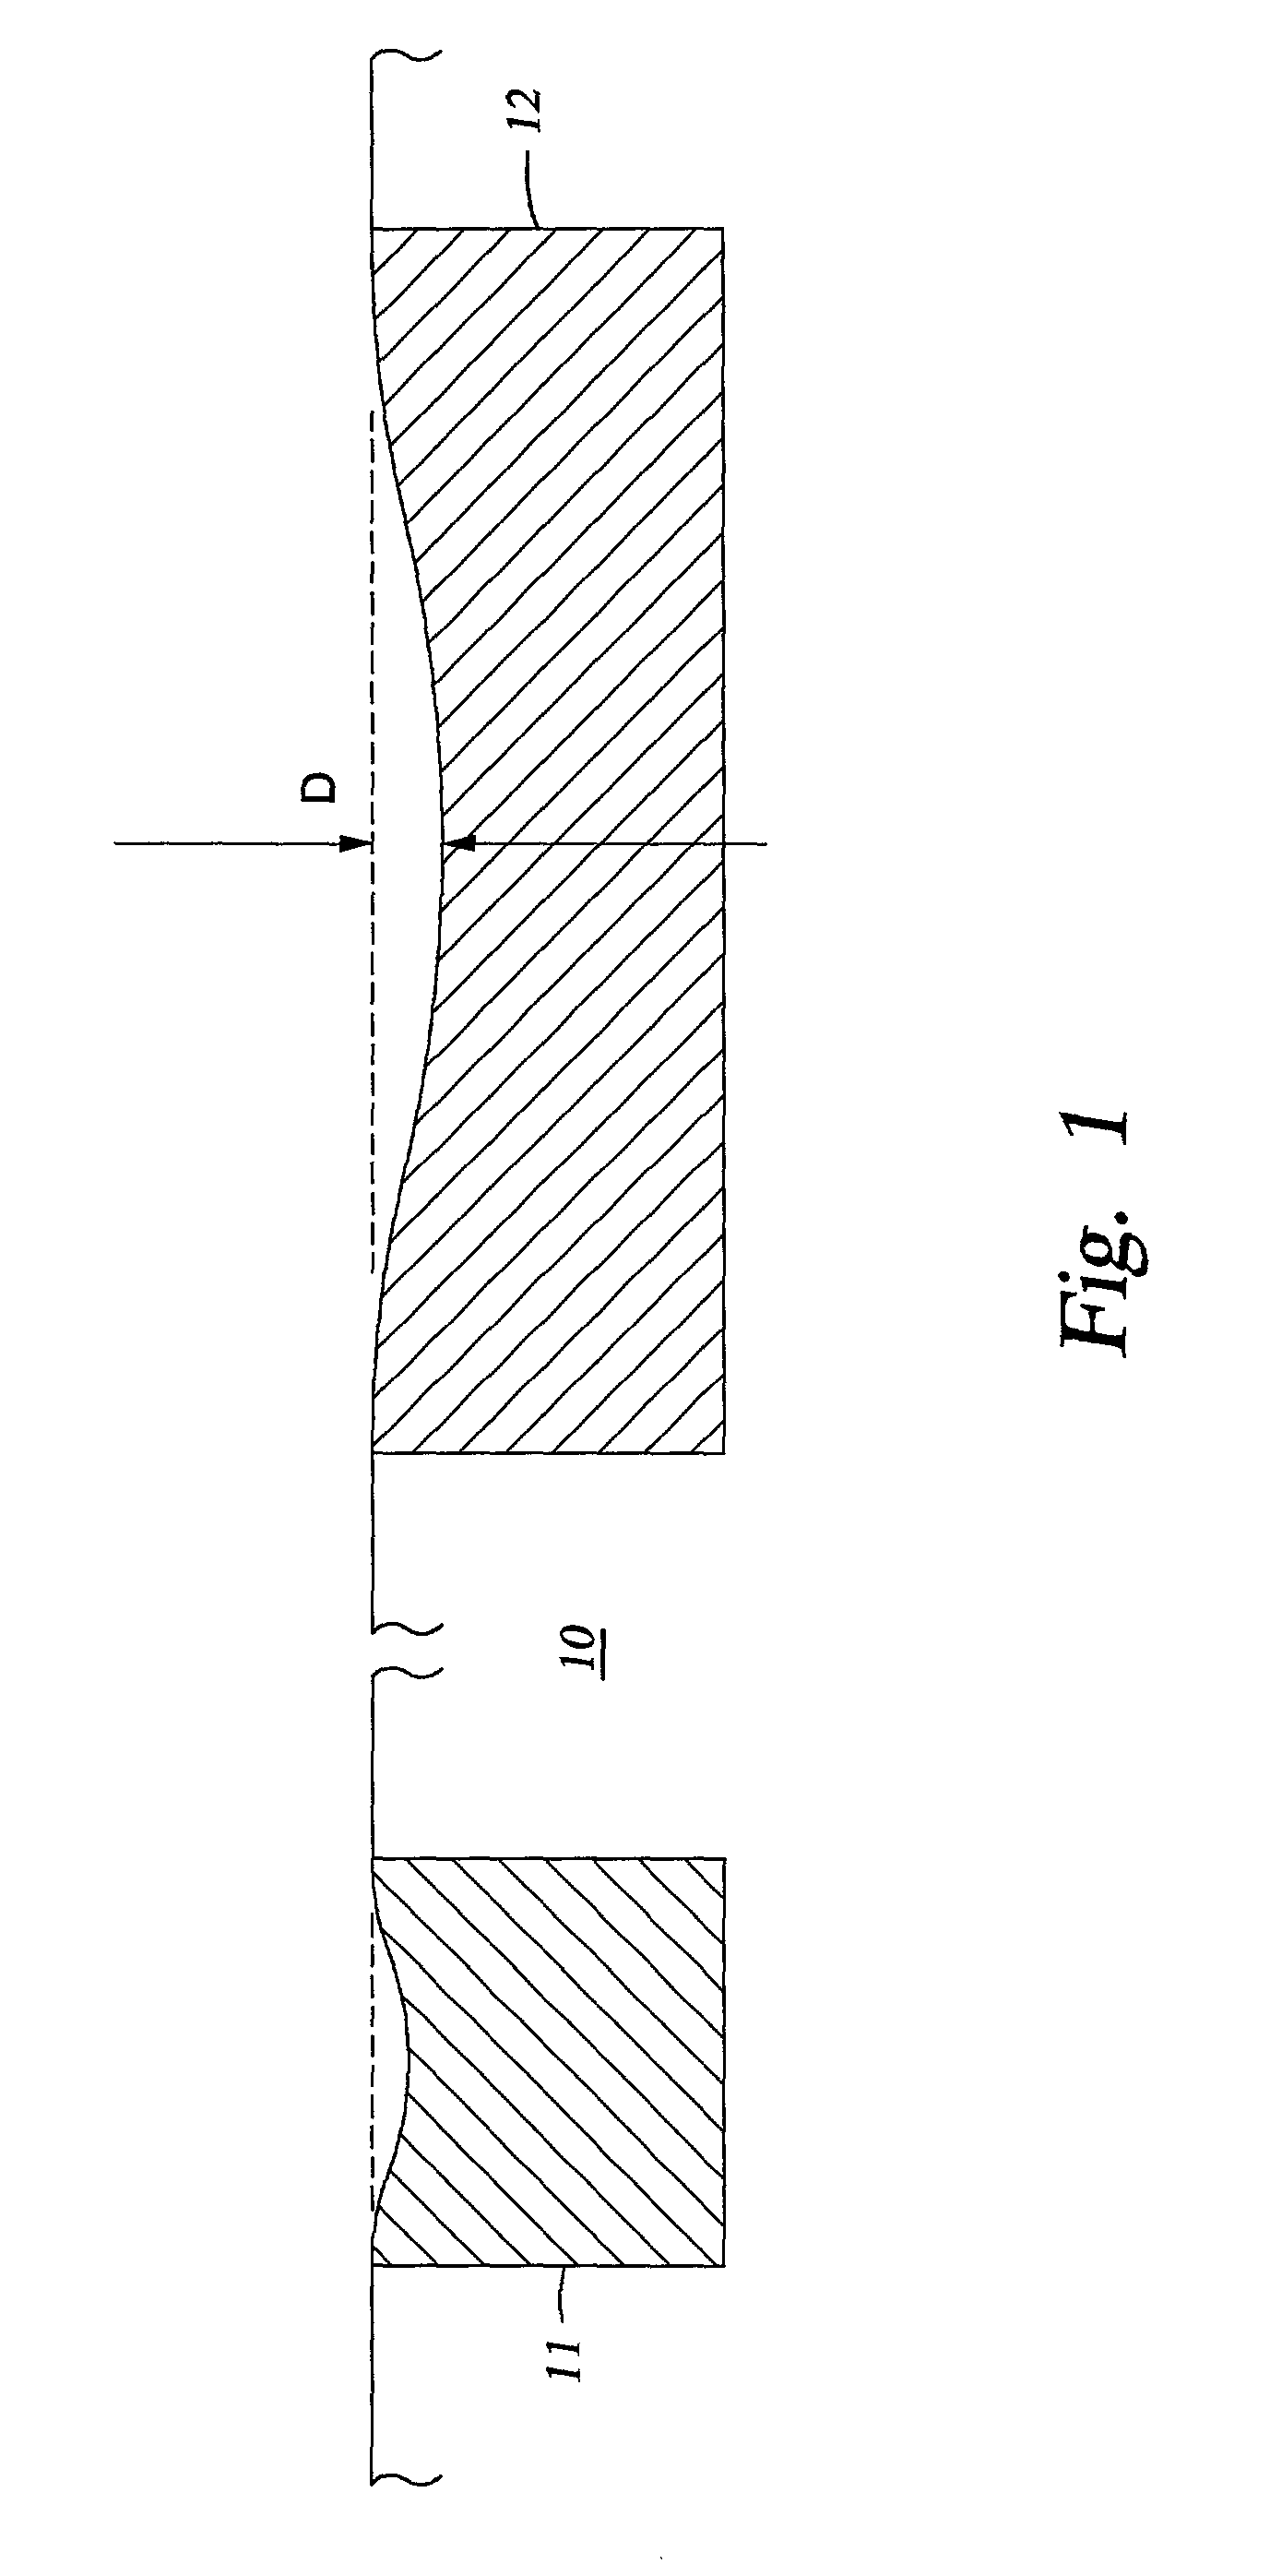 Method and apparatus for polishing metal and dielectric substrates